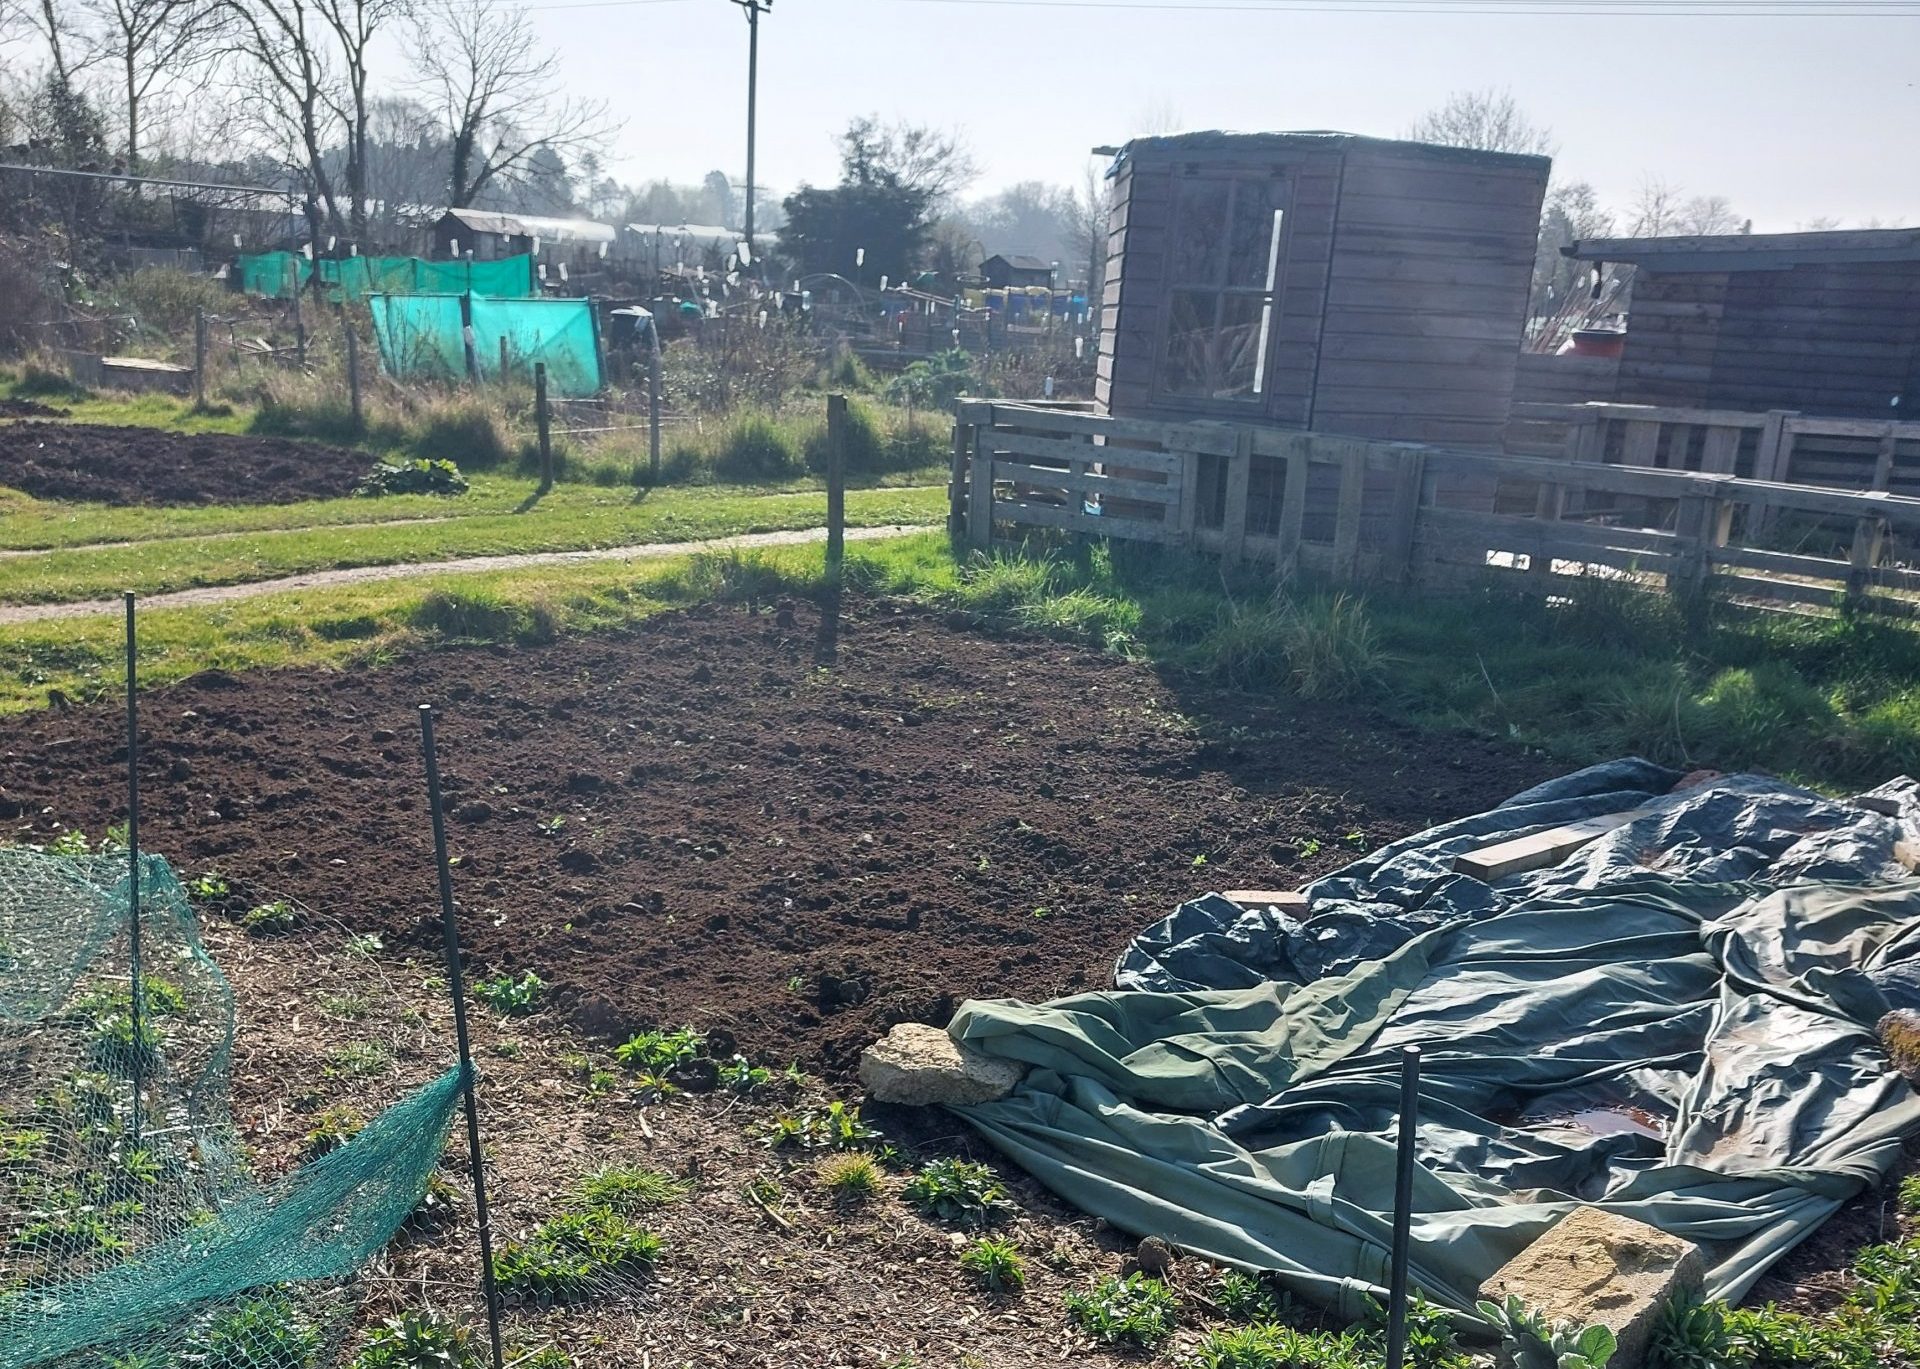 Allotment in March 2022